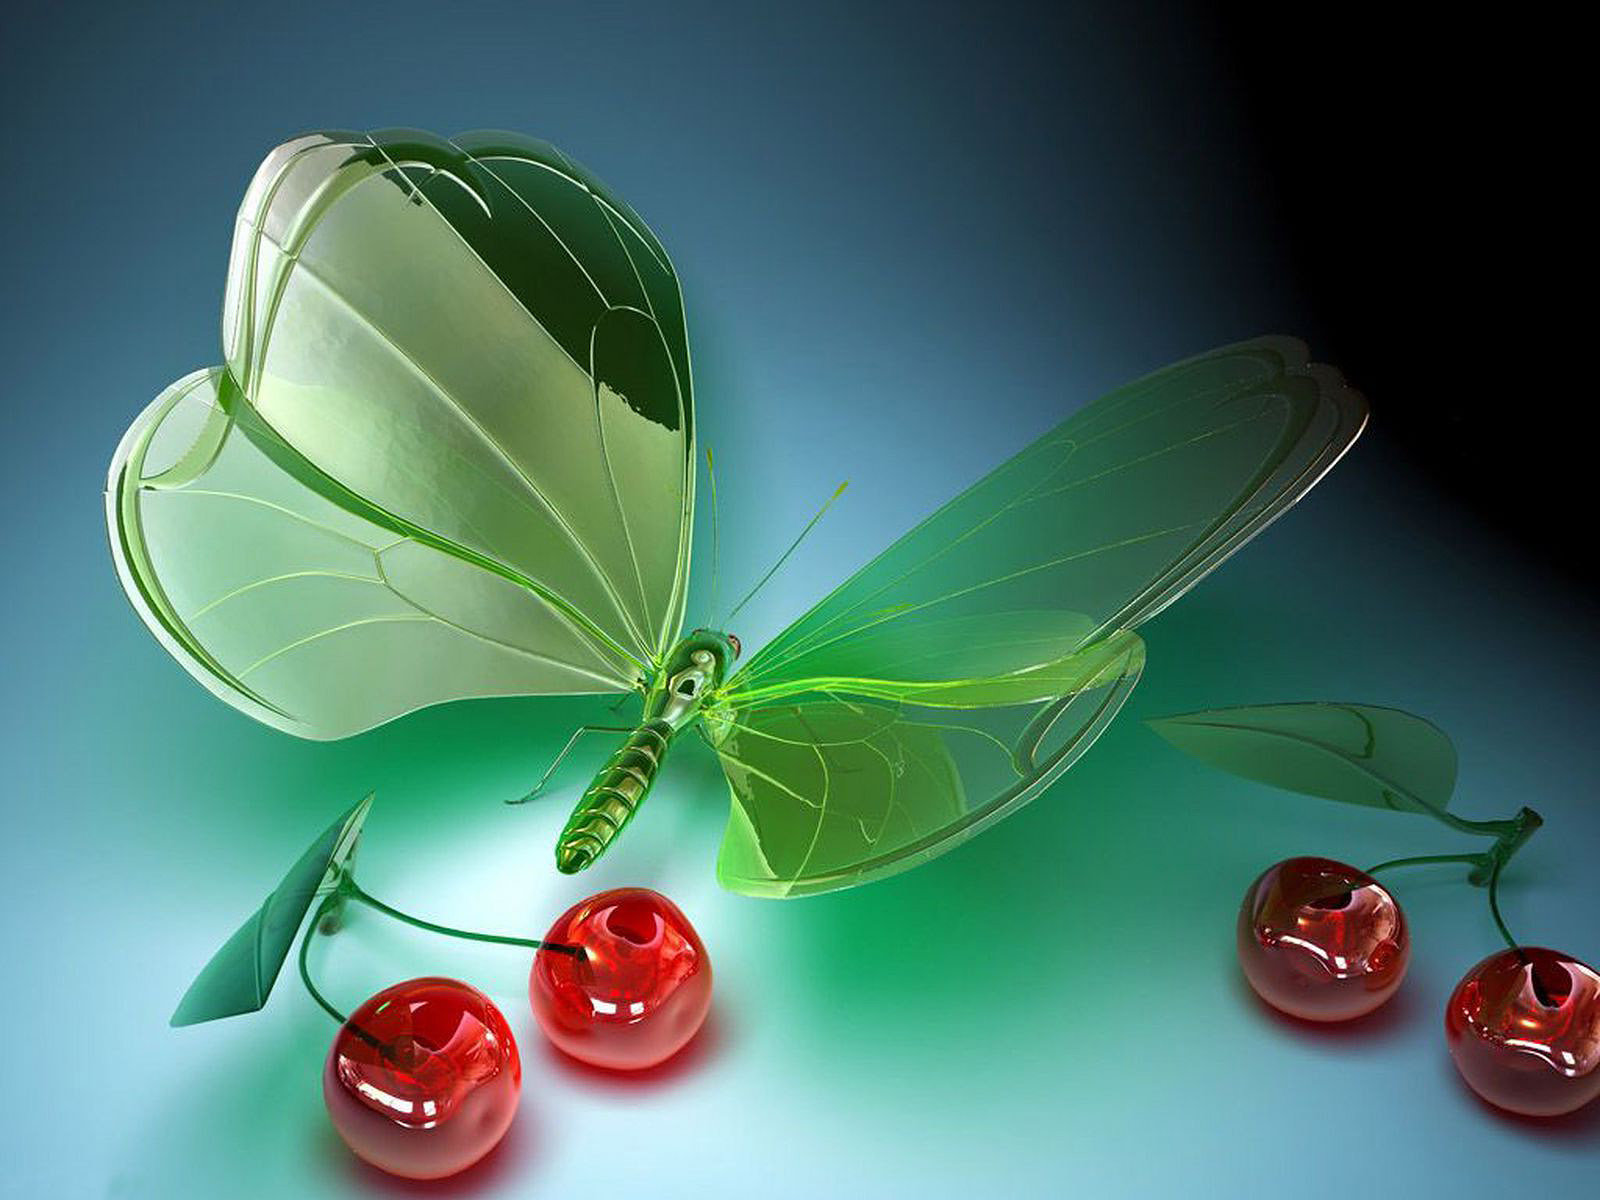 3D Glass Butterflies with Apple backgrounds